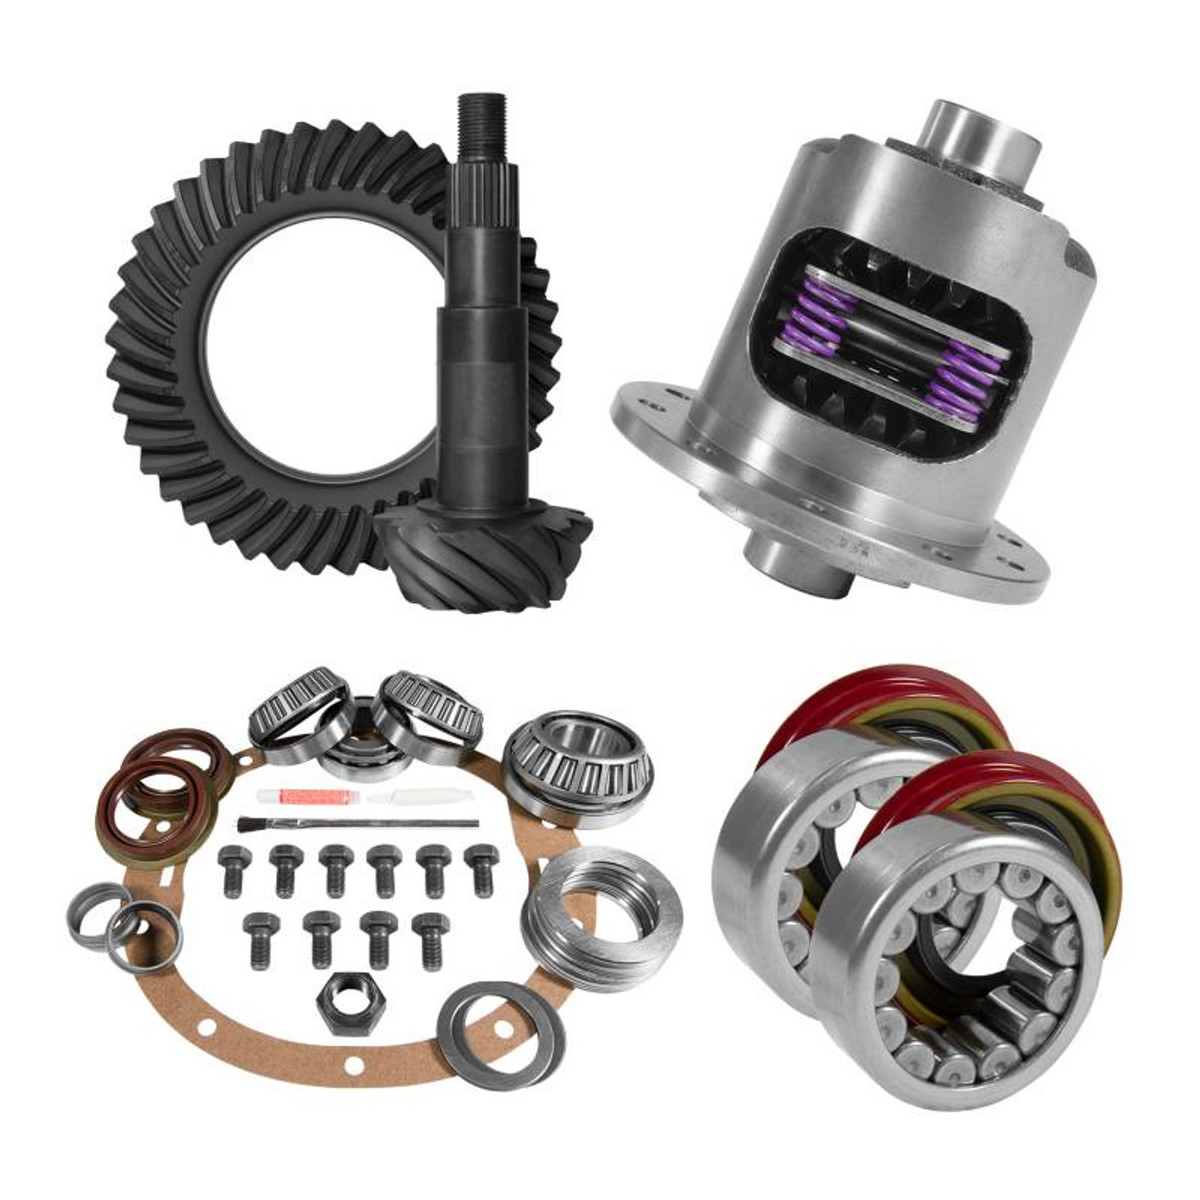 8.6 inch GM 4.88 Rear Ring and Pinion Install Kit 30 Spline Positraction Axle Bearings and Seals YGK2030